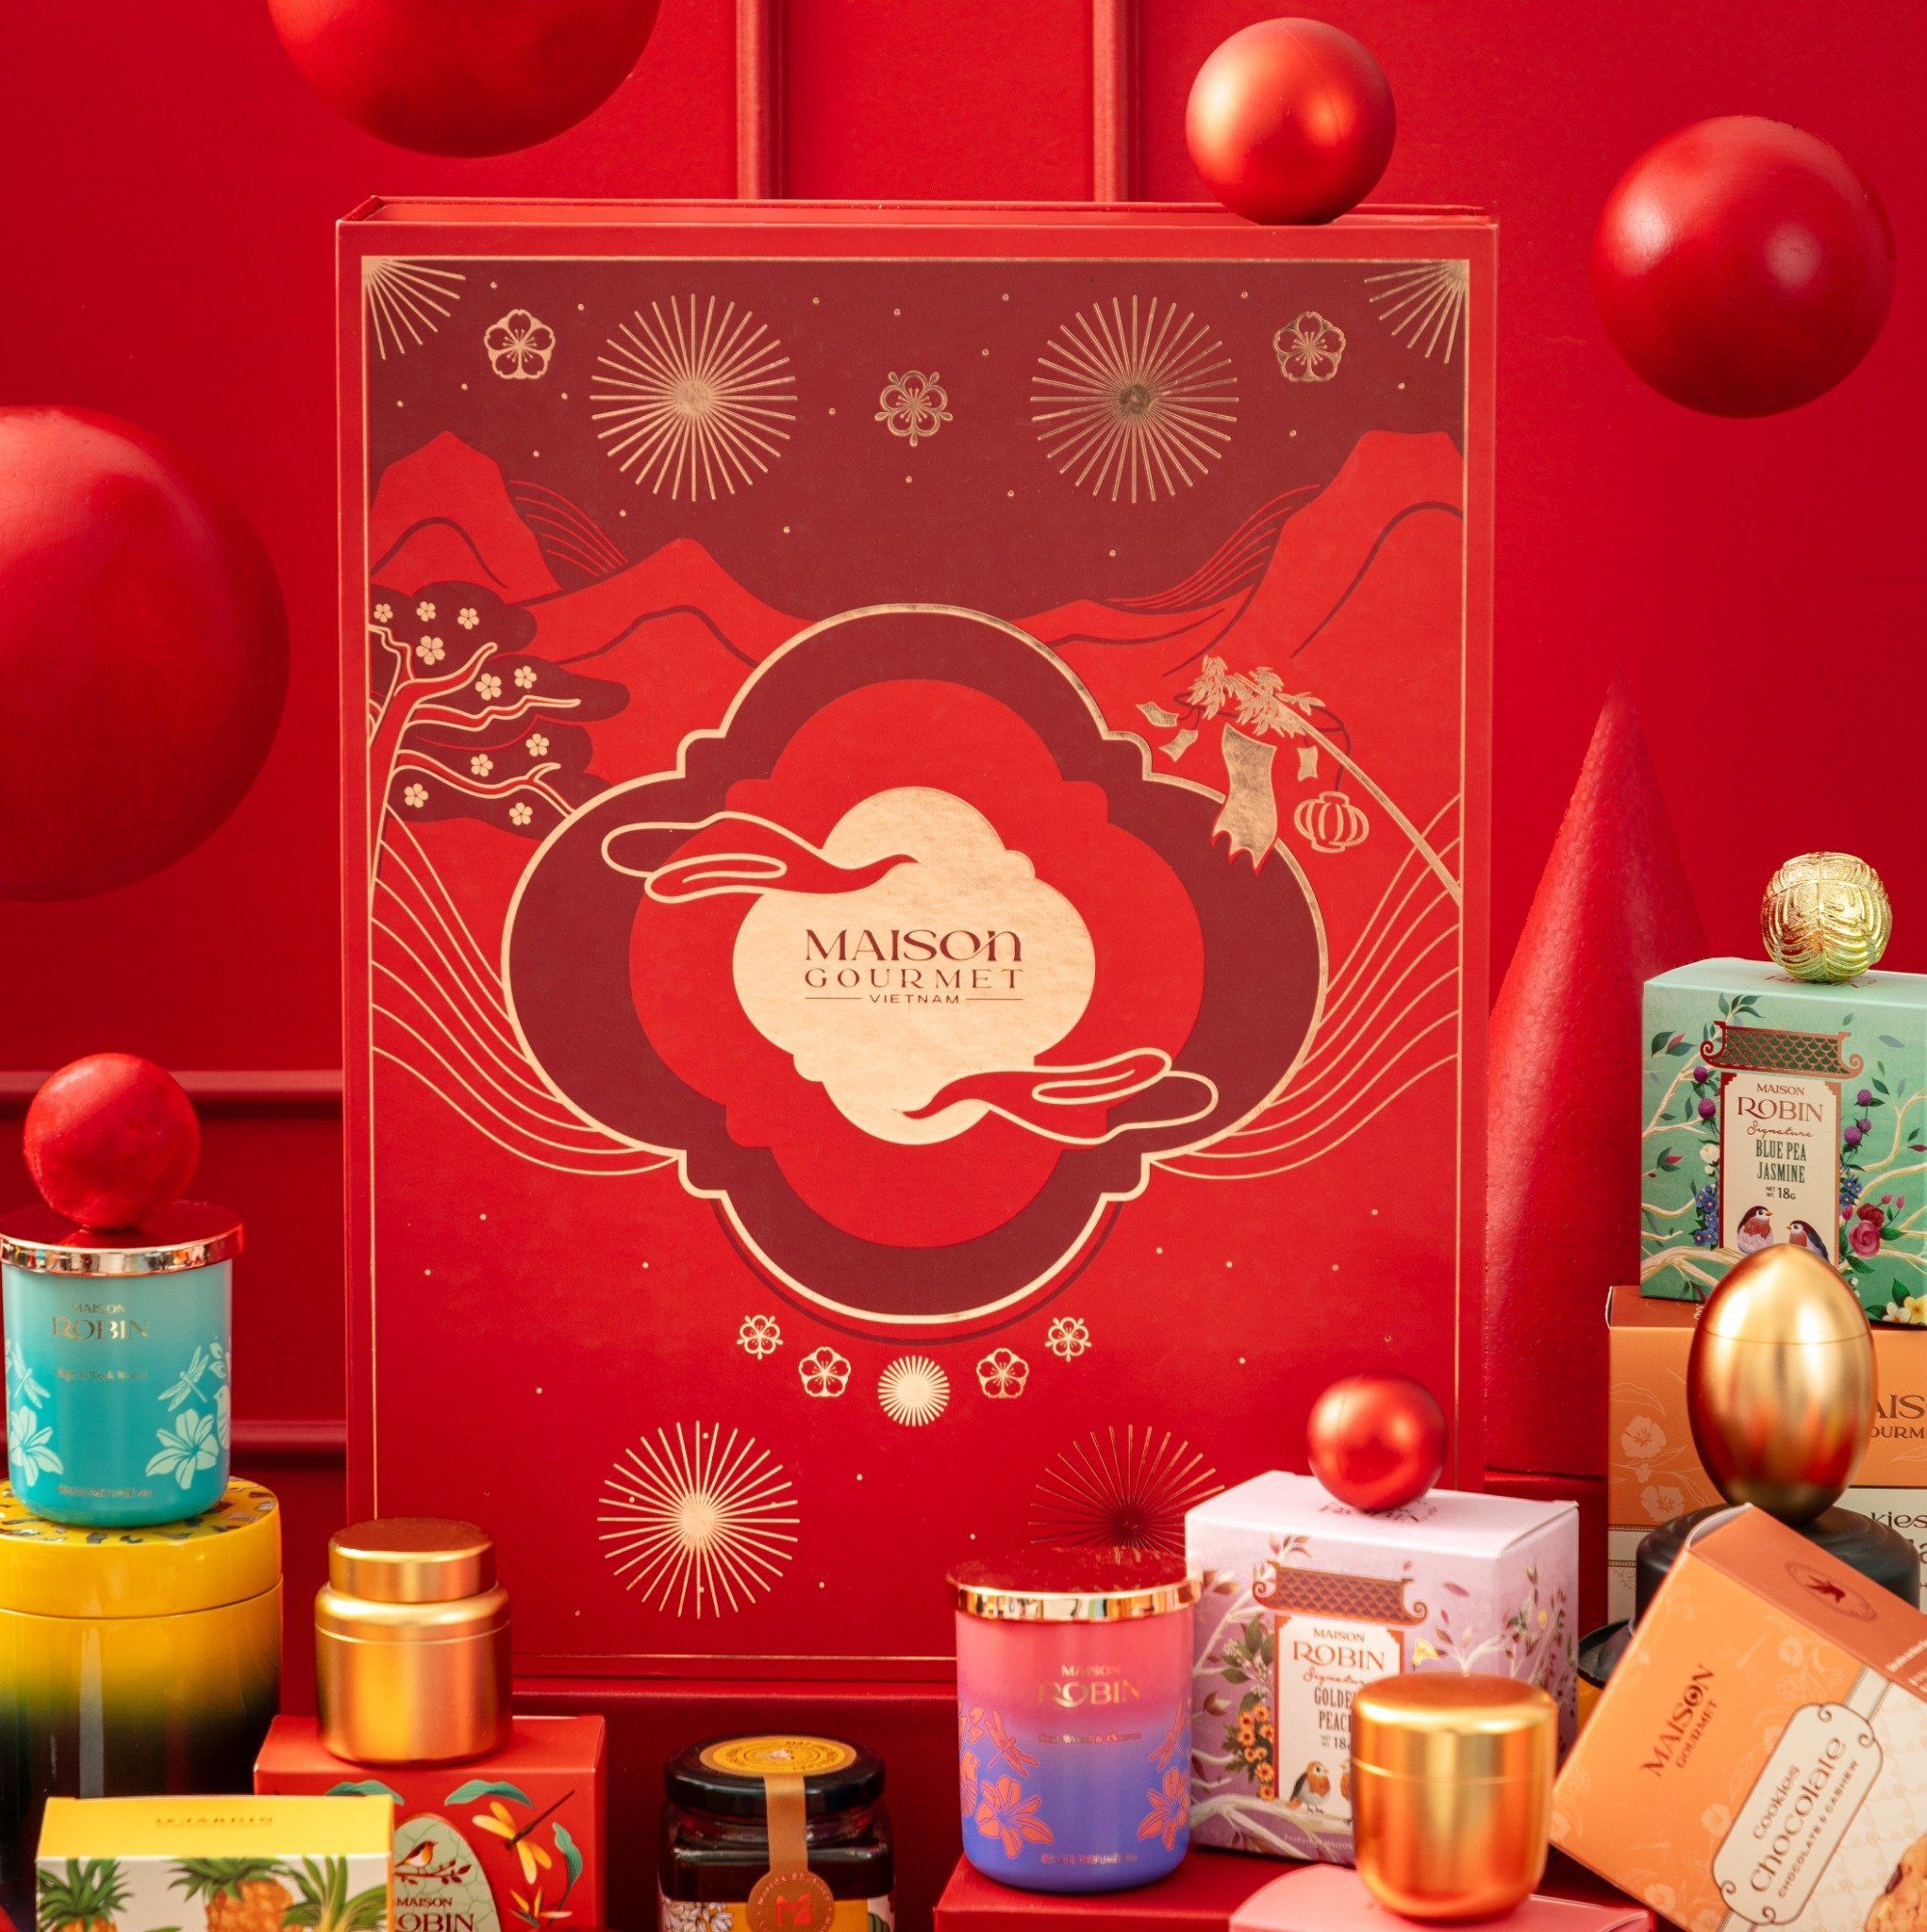 THE HAPPINESS GIFT BOX 2